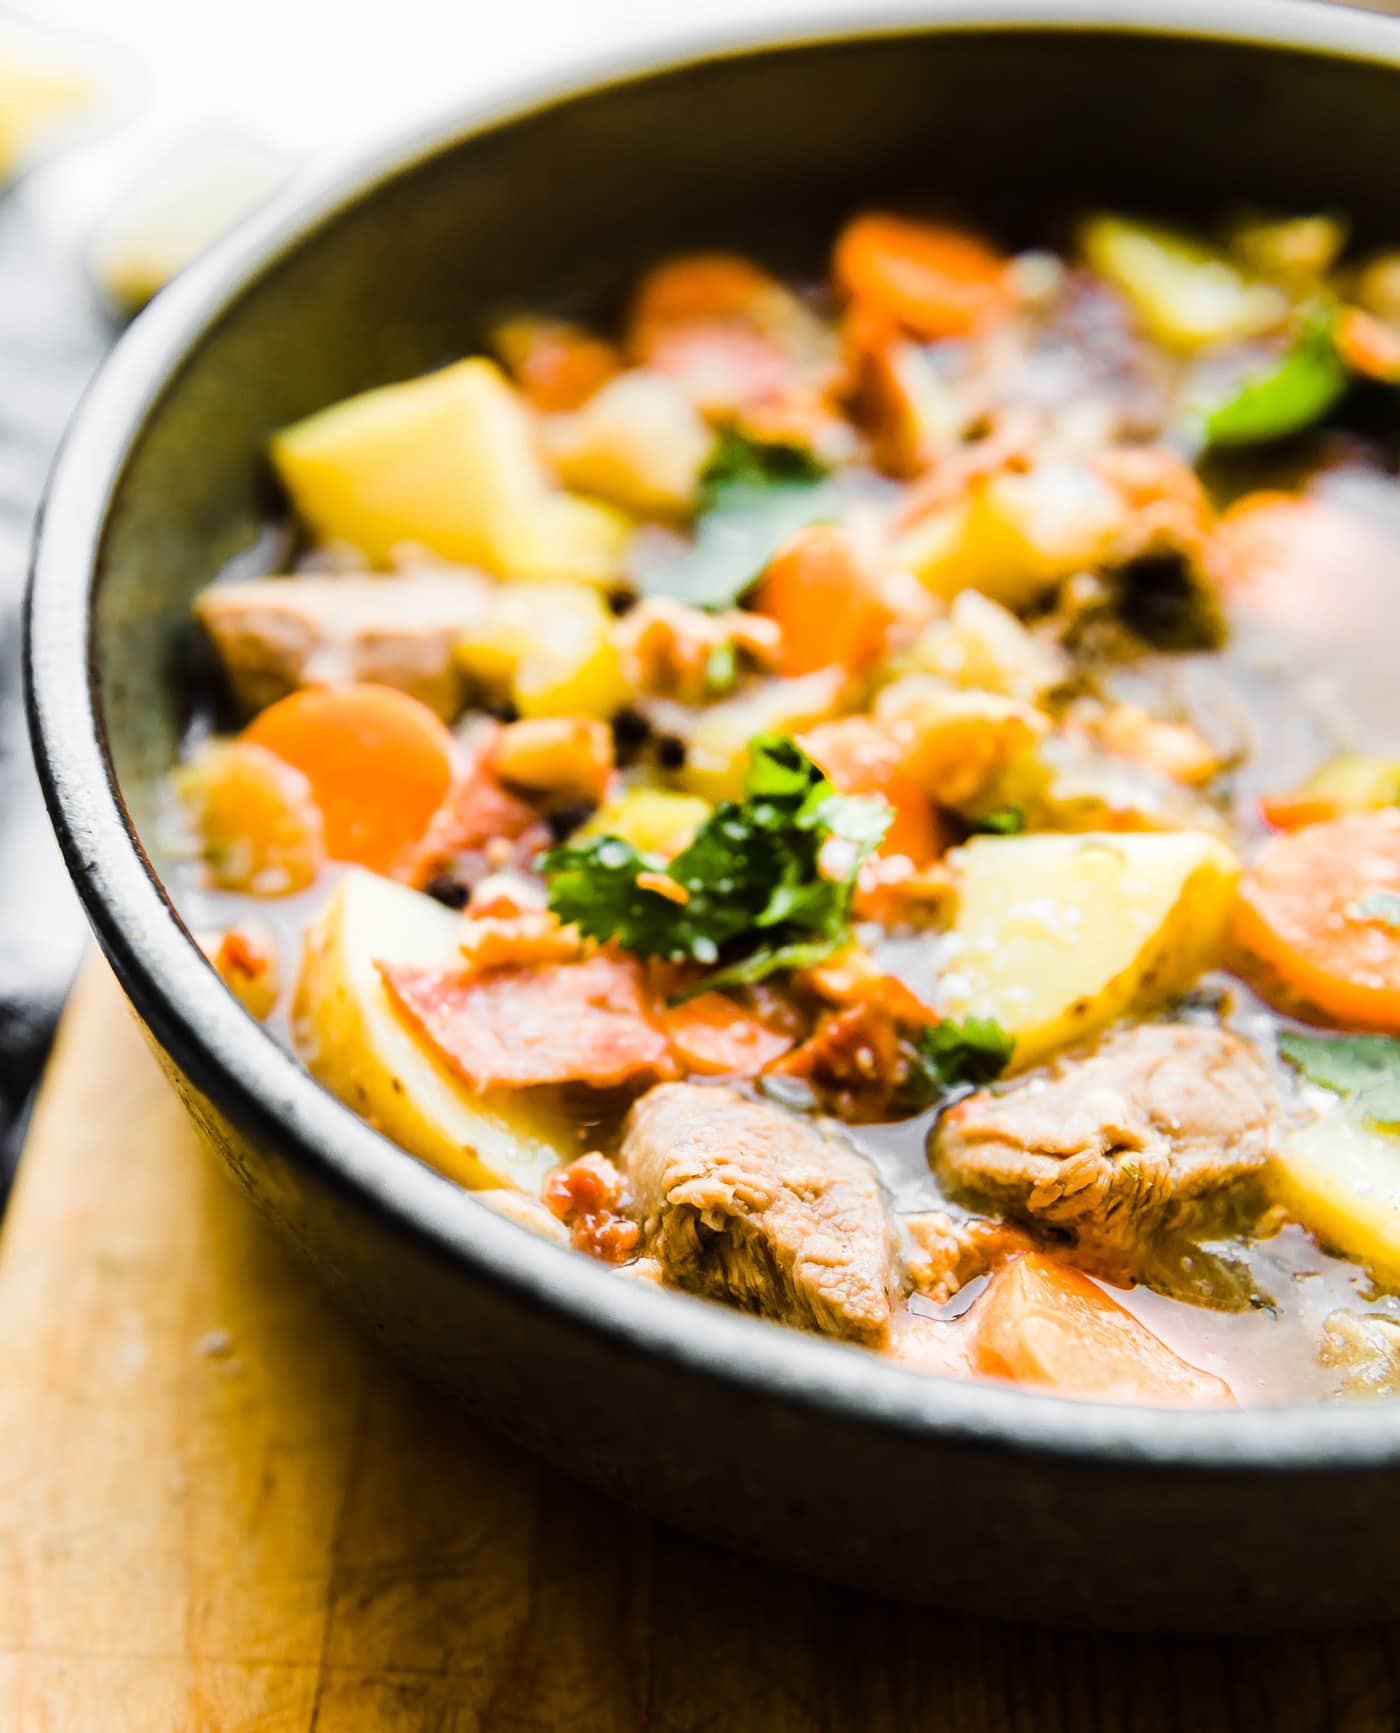 One pot Bacon Braised Lamb Stew! This paleo friendly Lamb stew is PACKED full of vegetables and flavor! Minimal ingredients and easy to make. Let's just say the bacon and lamb combo together do wonders. Great for family dinners, freezer friendly, and whole 30 option. #stew #paleo #onepot #whole30